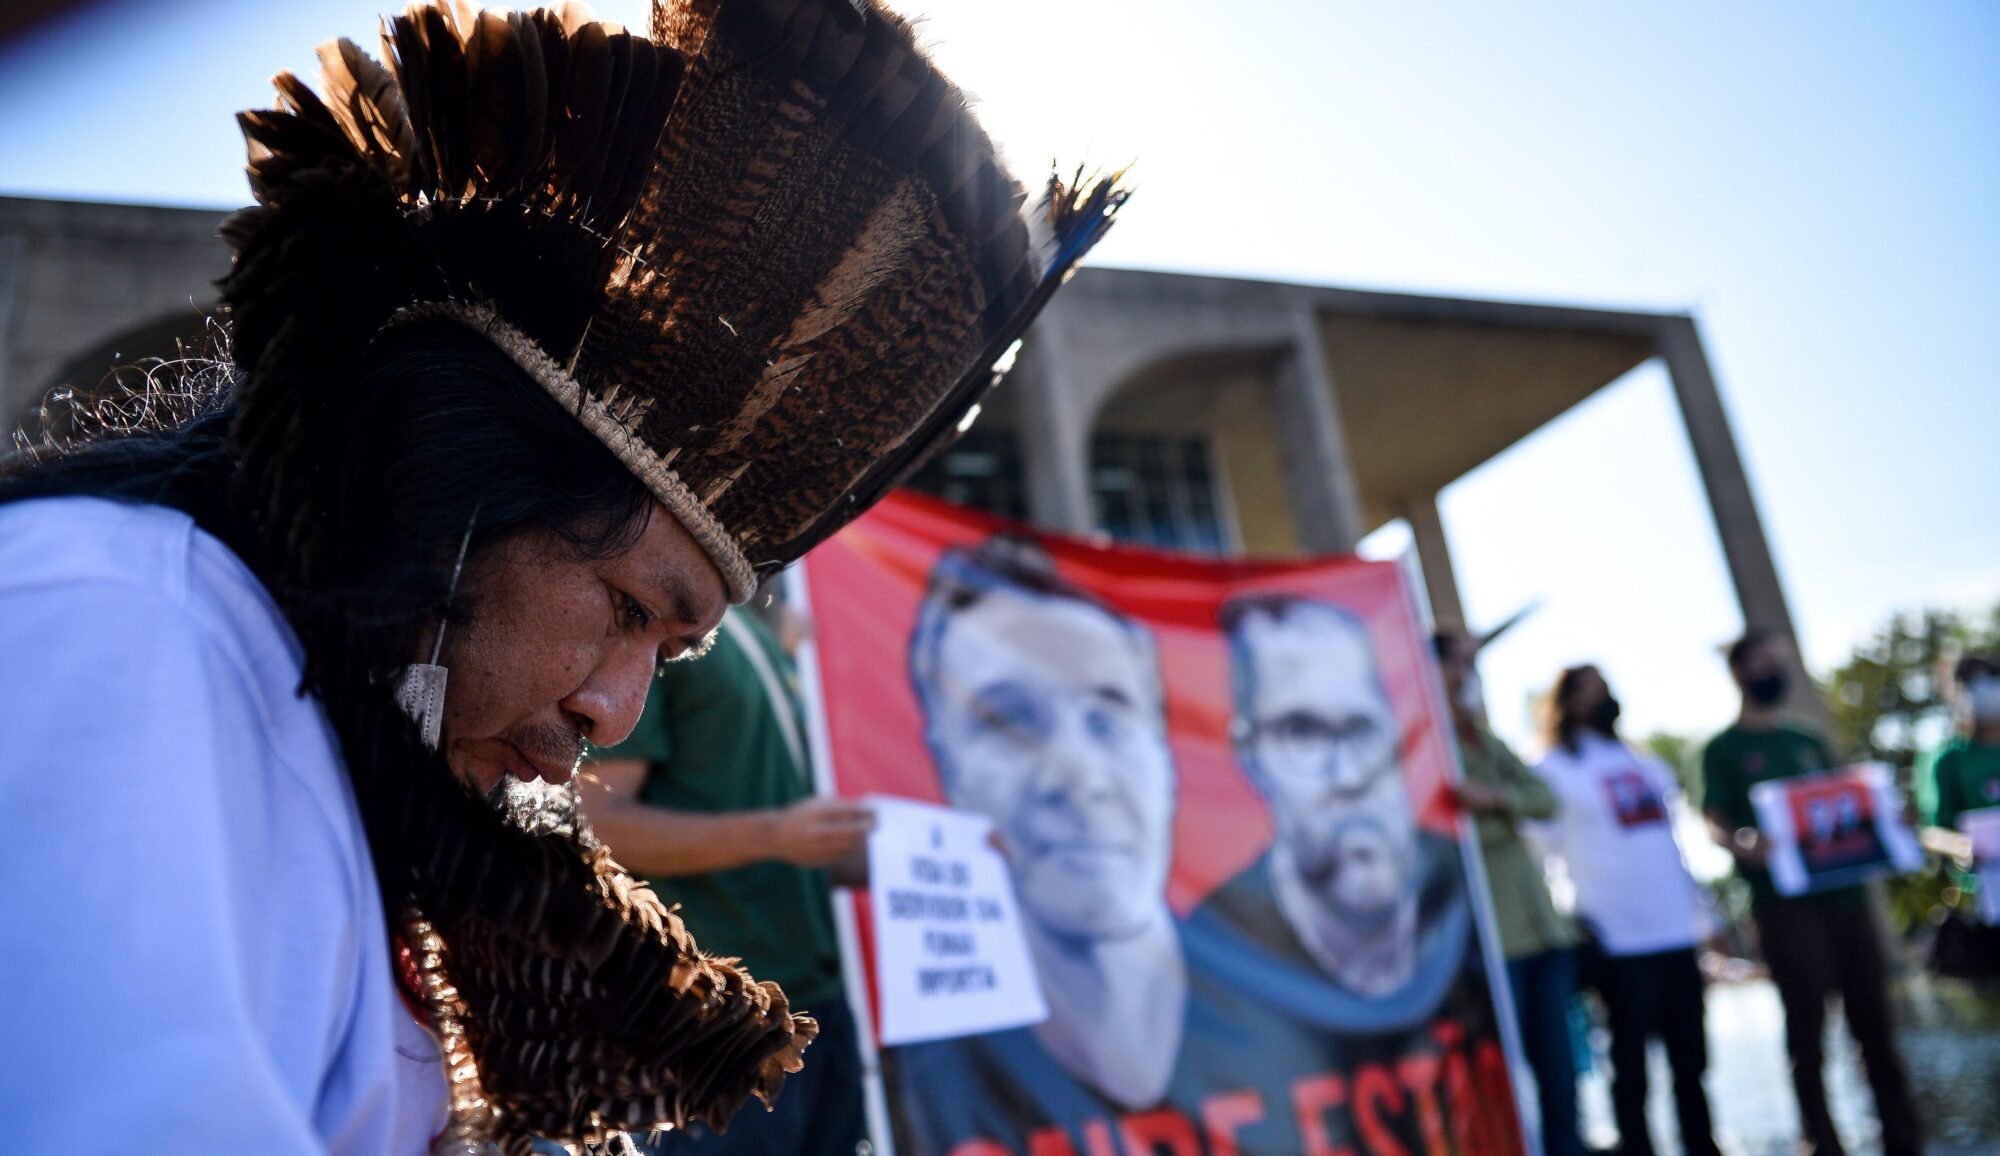 <p>An indigenous protestor demonstrates outside Brazil’s Ministry of Justice in June, following the disappearance of Dom Phillips and Bruno Pereira in the Amazon. Their murders drew global attention to the dangers environmental defenders face in the region (Image: Antonio Molina / Foto Arena / Alamy)</p>